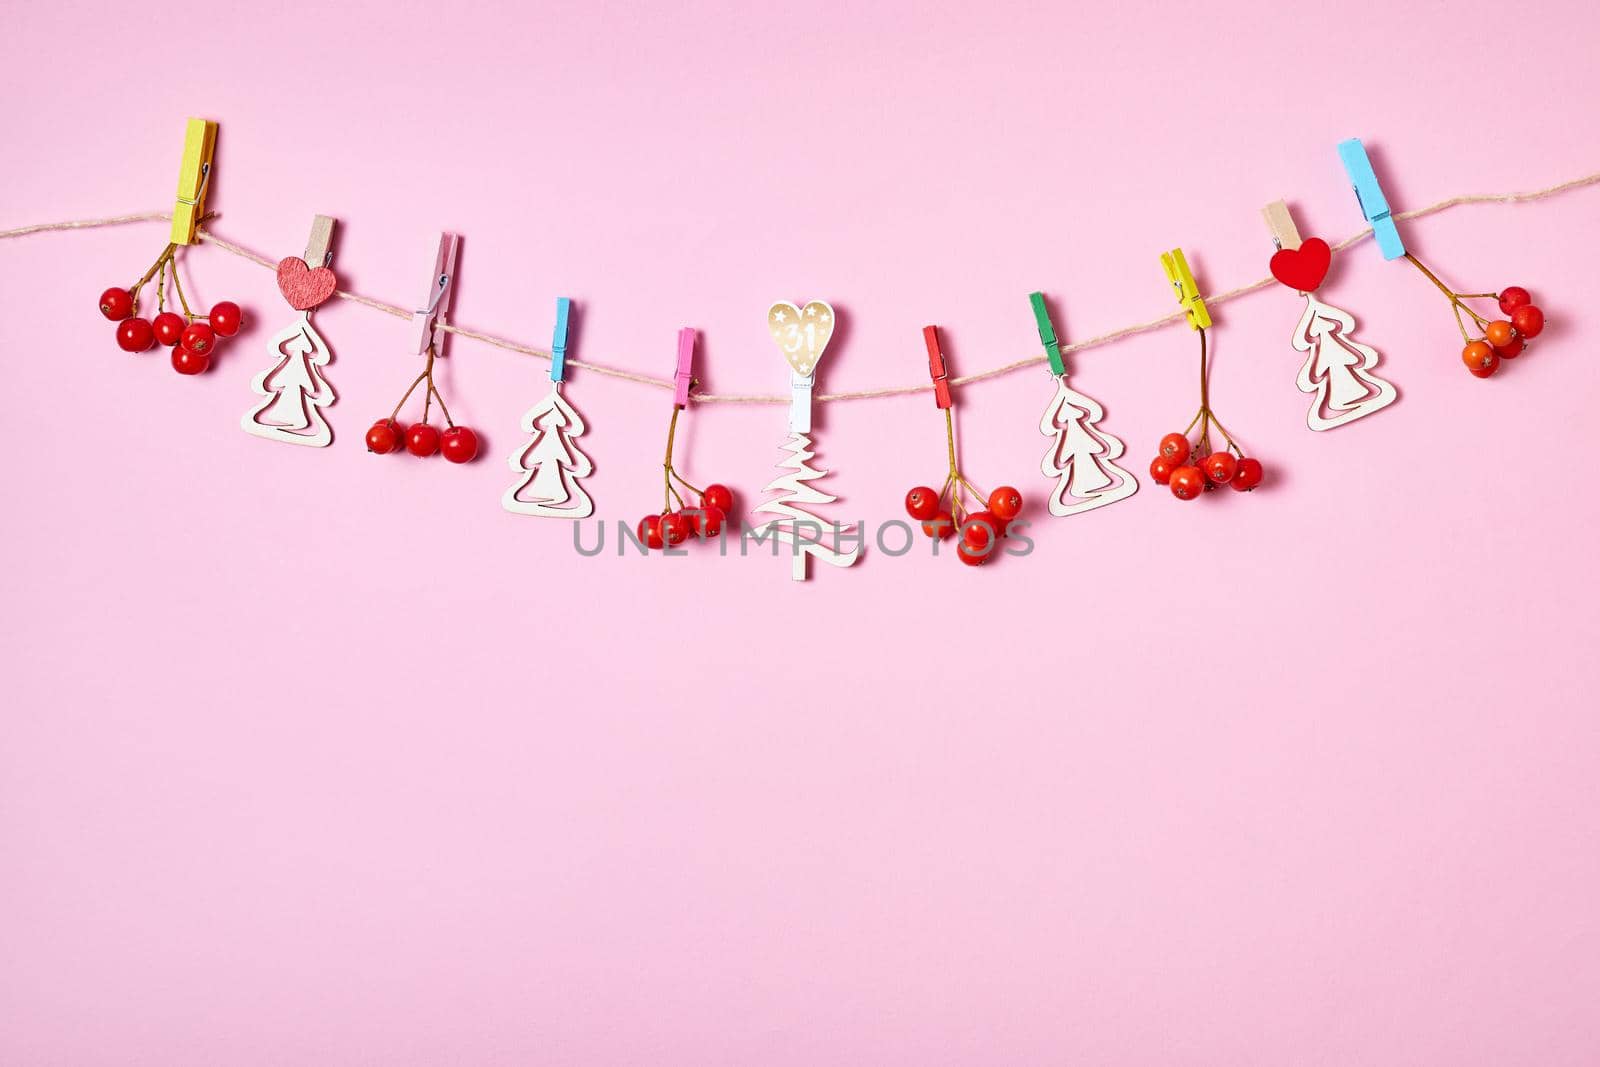 Figurines of wooden Christmas trees and rowan berries are hung with clothespins on a rope on a pink background by marketlan